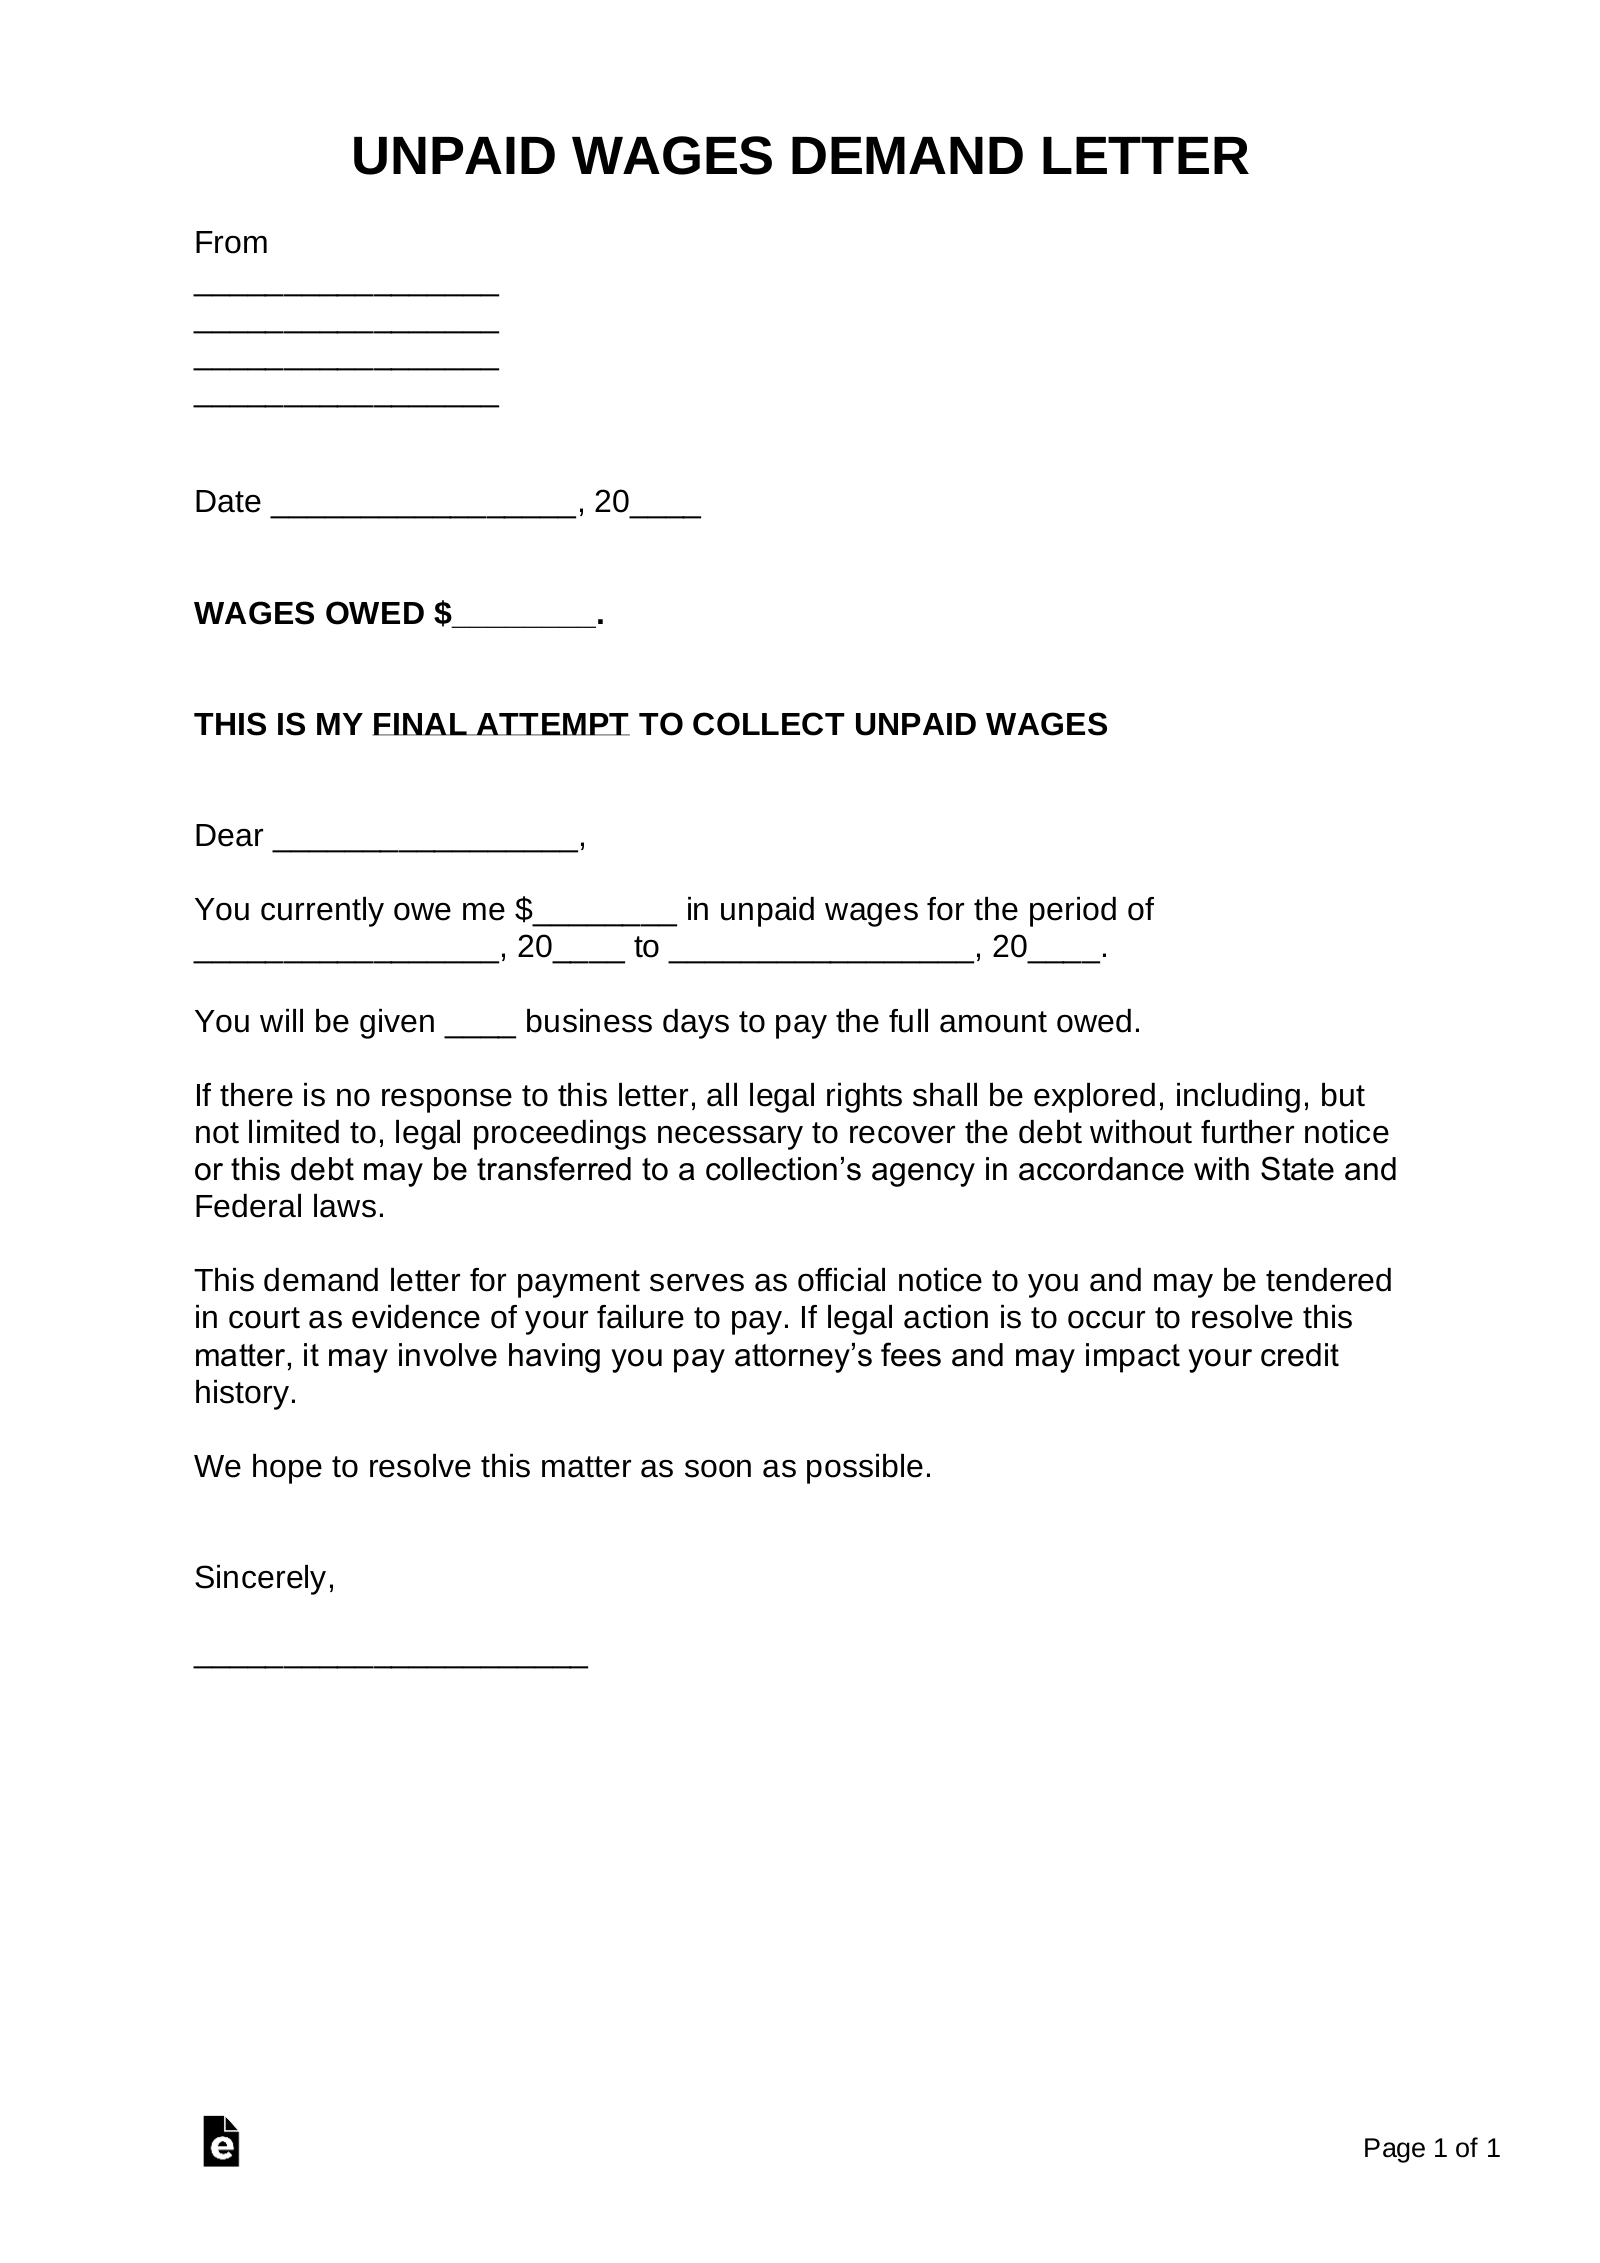 Unpaid Wages Demand Letter | Sample